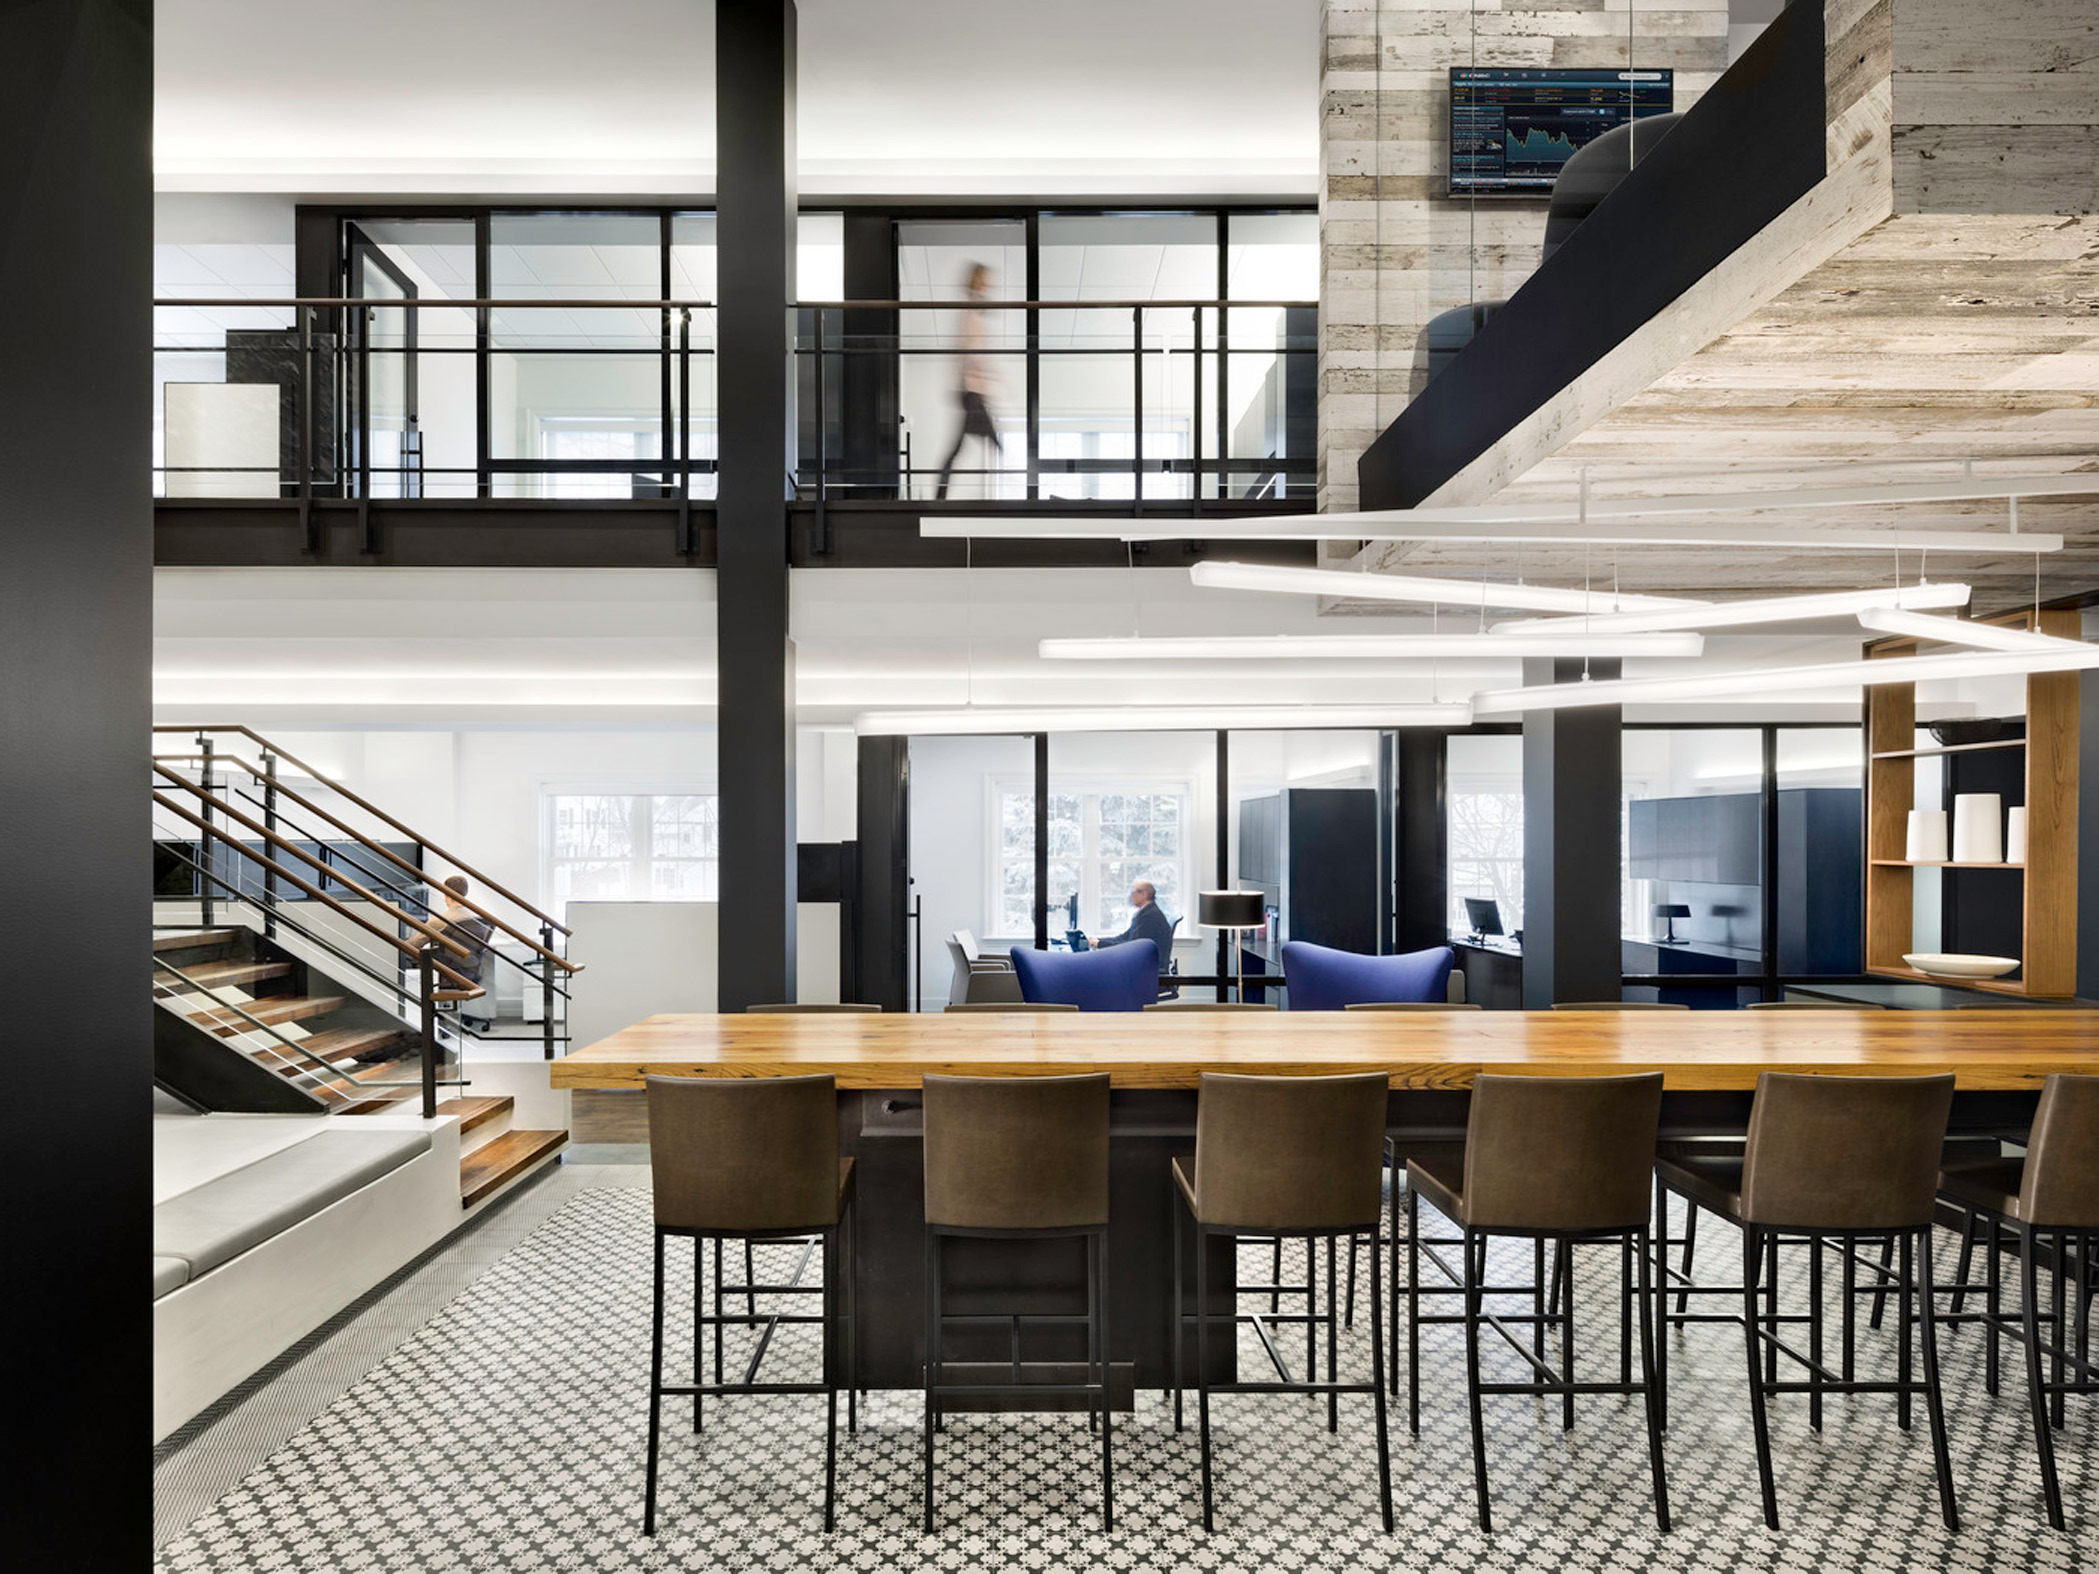 Modern office interior showcasing an open workspace with wood-topped bar-style seating, black steel-frame mezzanine, geometric patterned flooring, and suspended linear lighting fixtures. A person walks across the transparent walkway, adding human scale to the minimalist design.